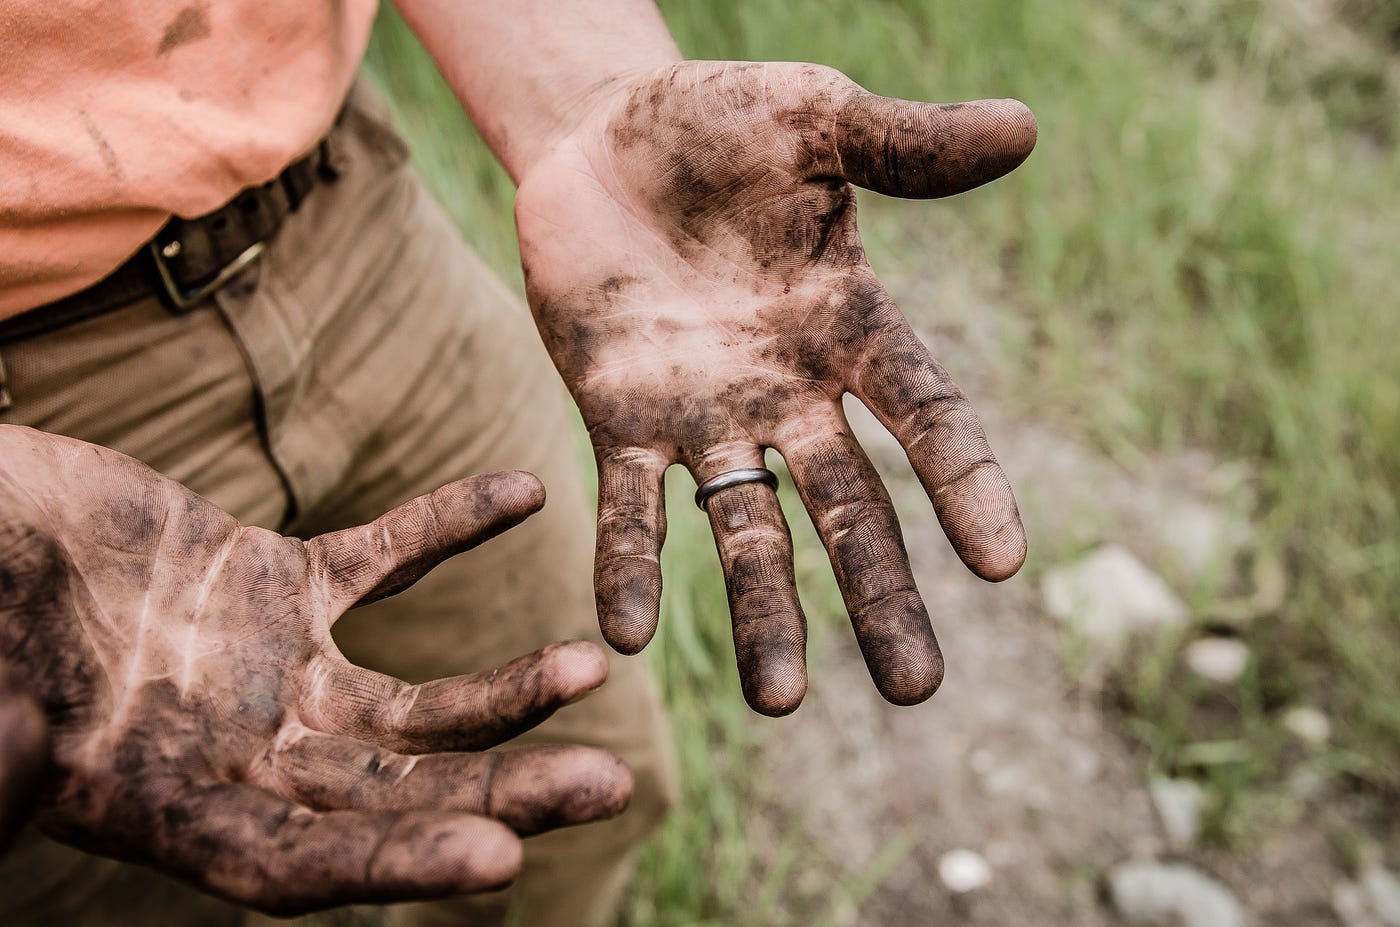 A man with dirty hands.